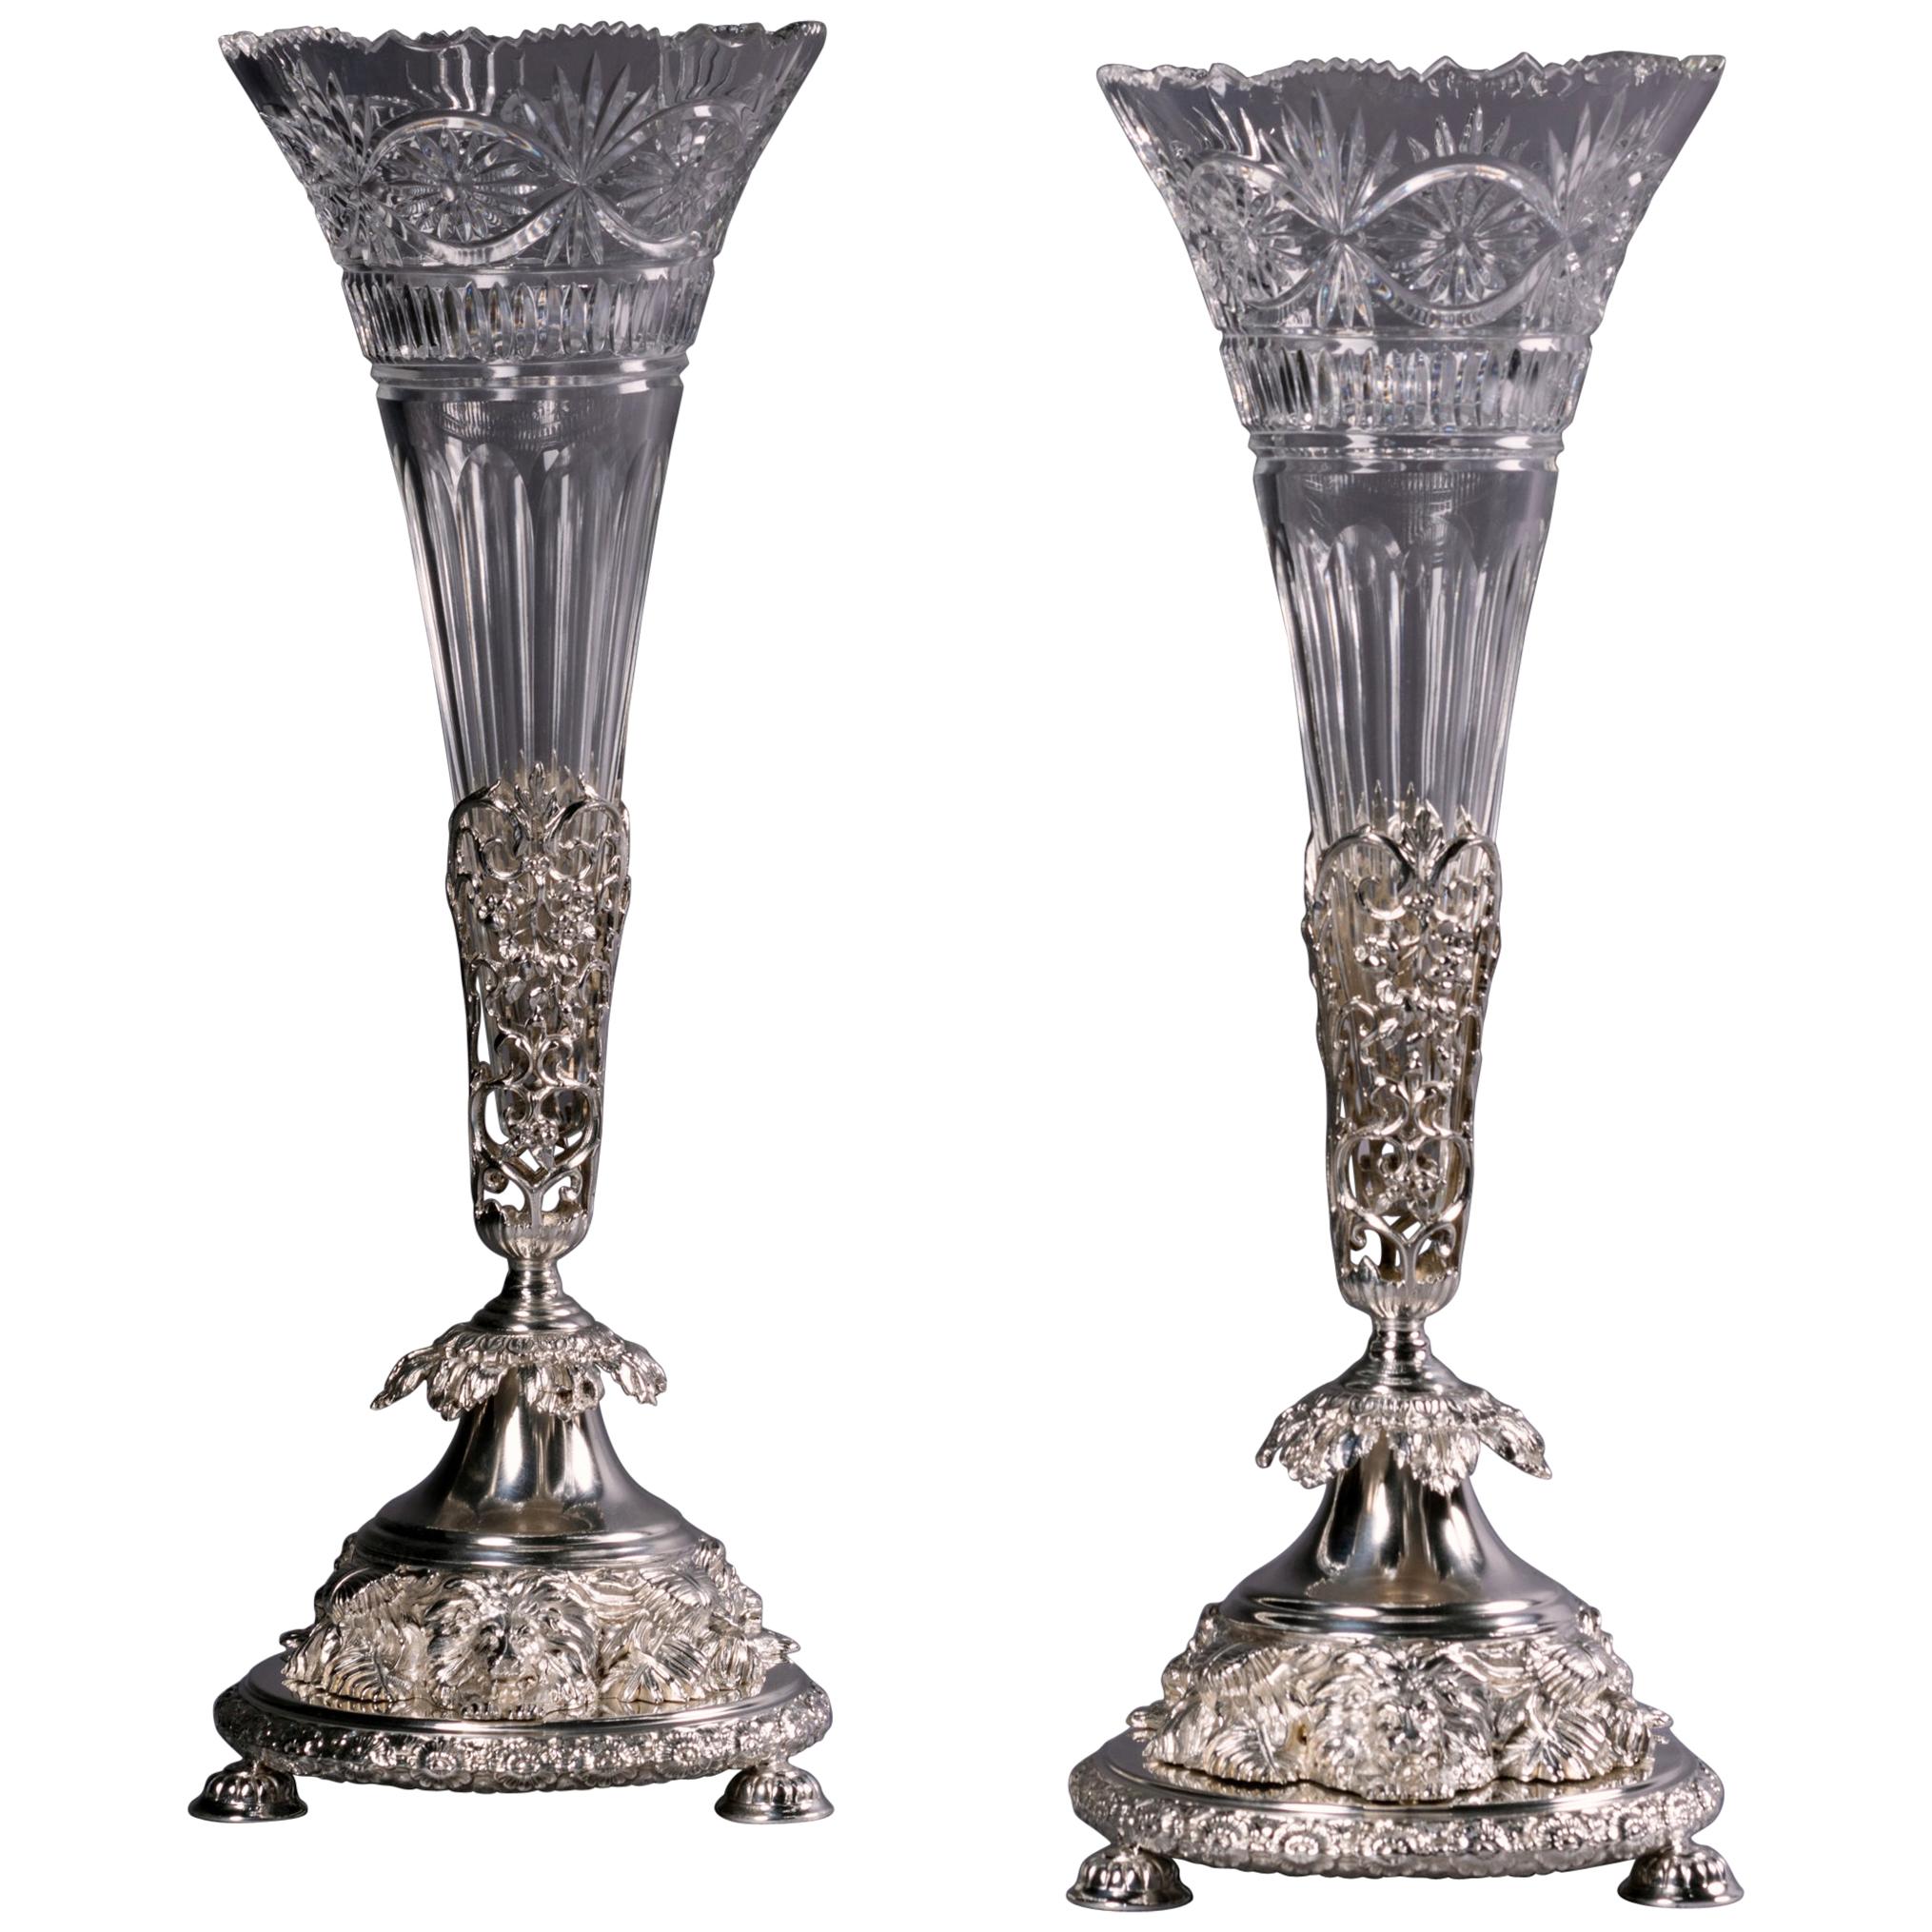 Joseph Rodgers & Sons Vases and Vessels